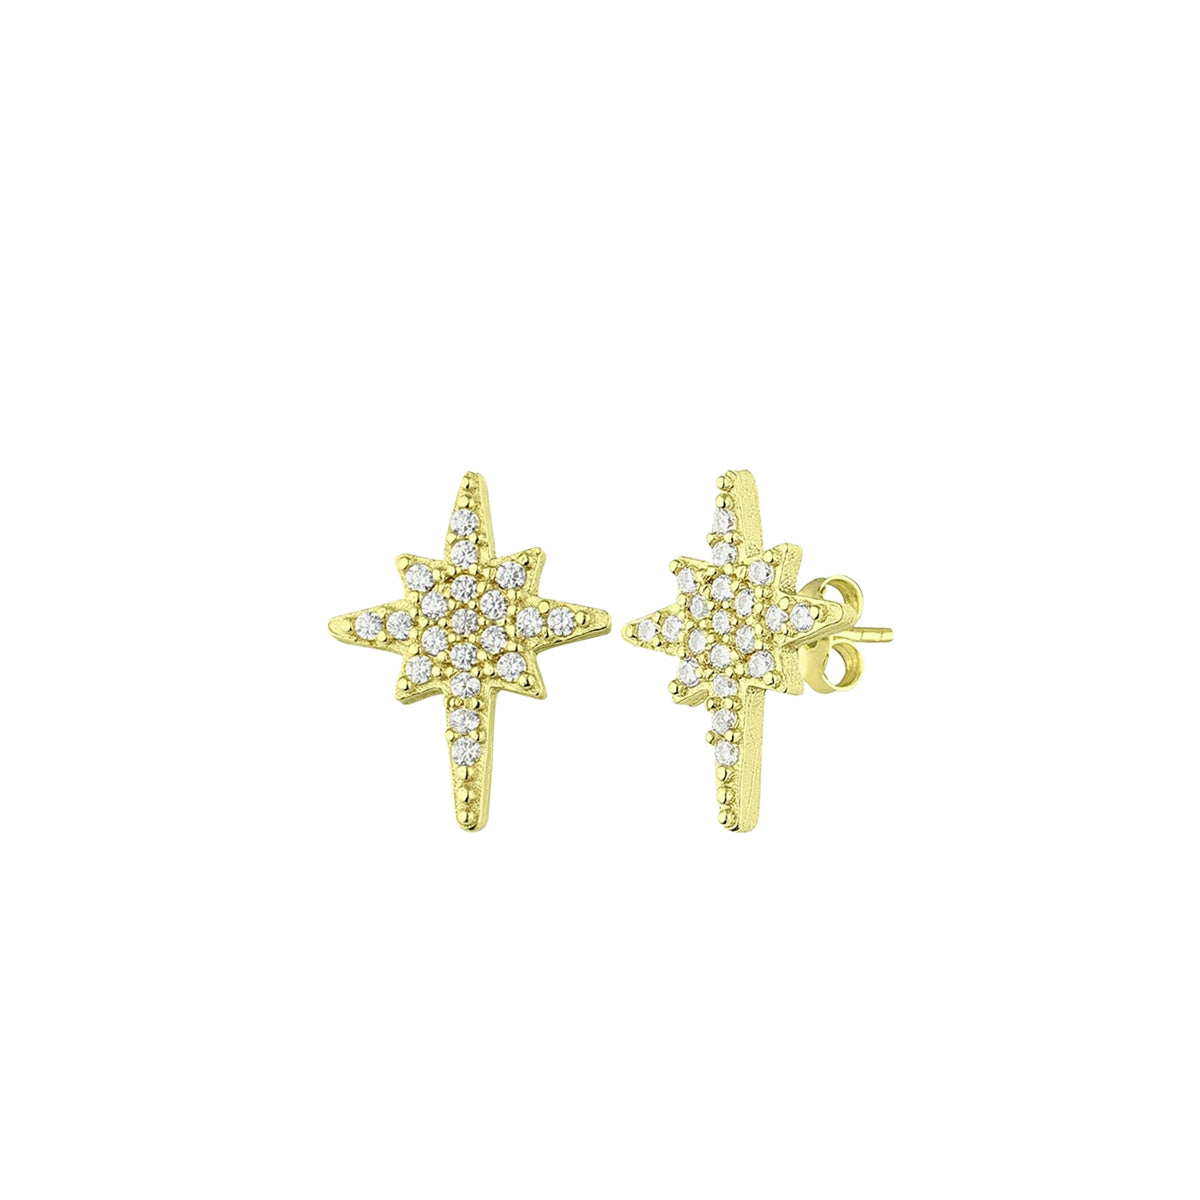 Northern Star Sterling Silver Stud Earring